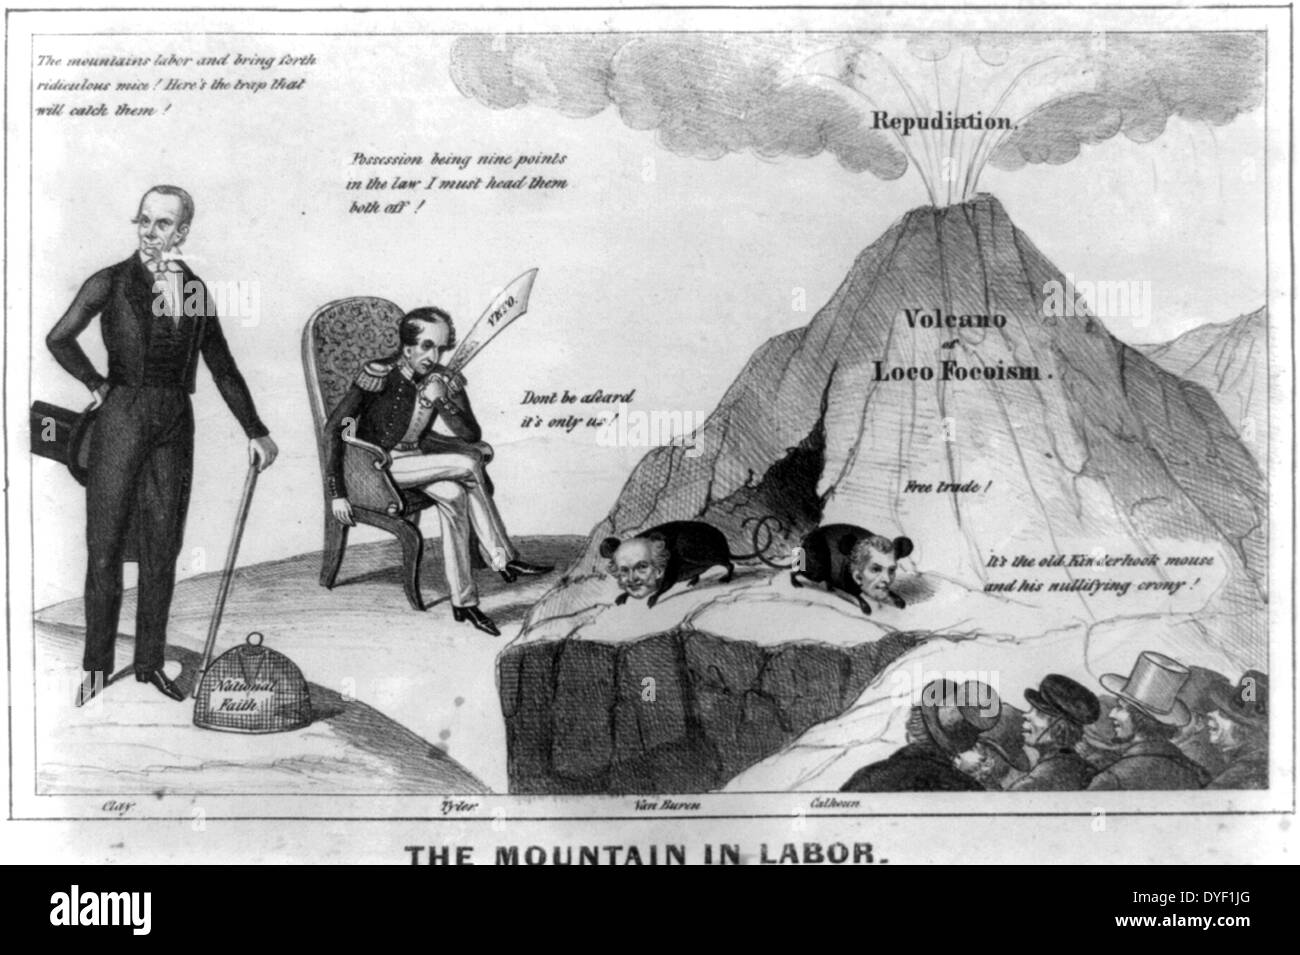 The mountain in labor political cartoon by Henry R. Robinson, circa 1843. Lithographic print. Satirising the democrats of the time, and specifically Martin Van Buren and John C. Calhoun. Stock Photo